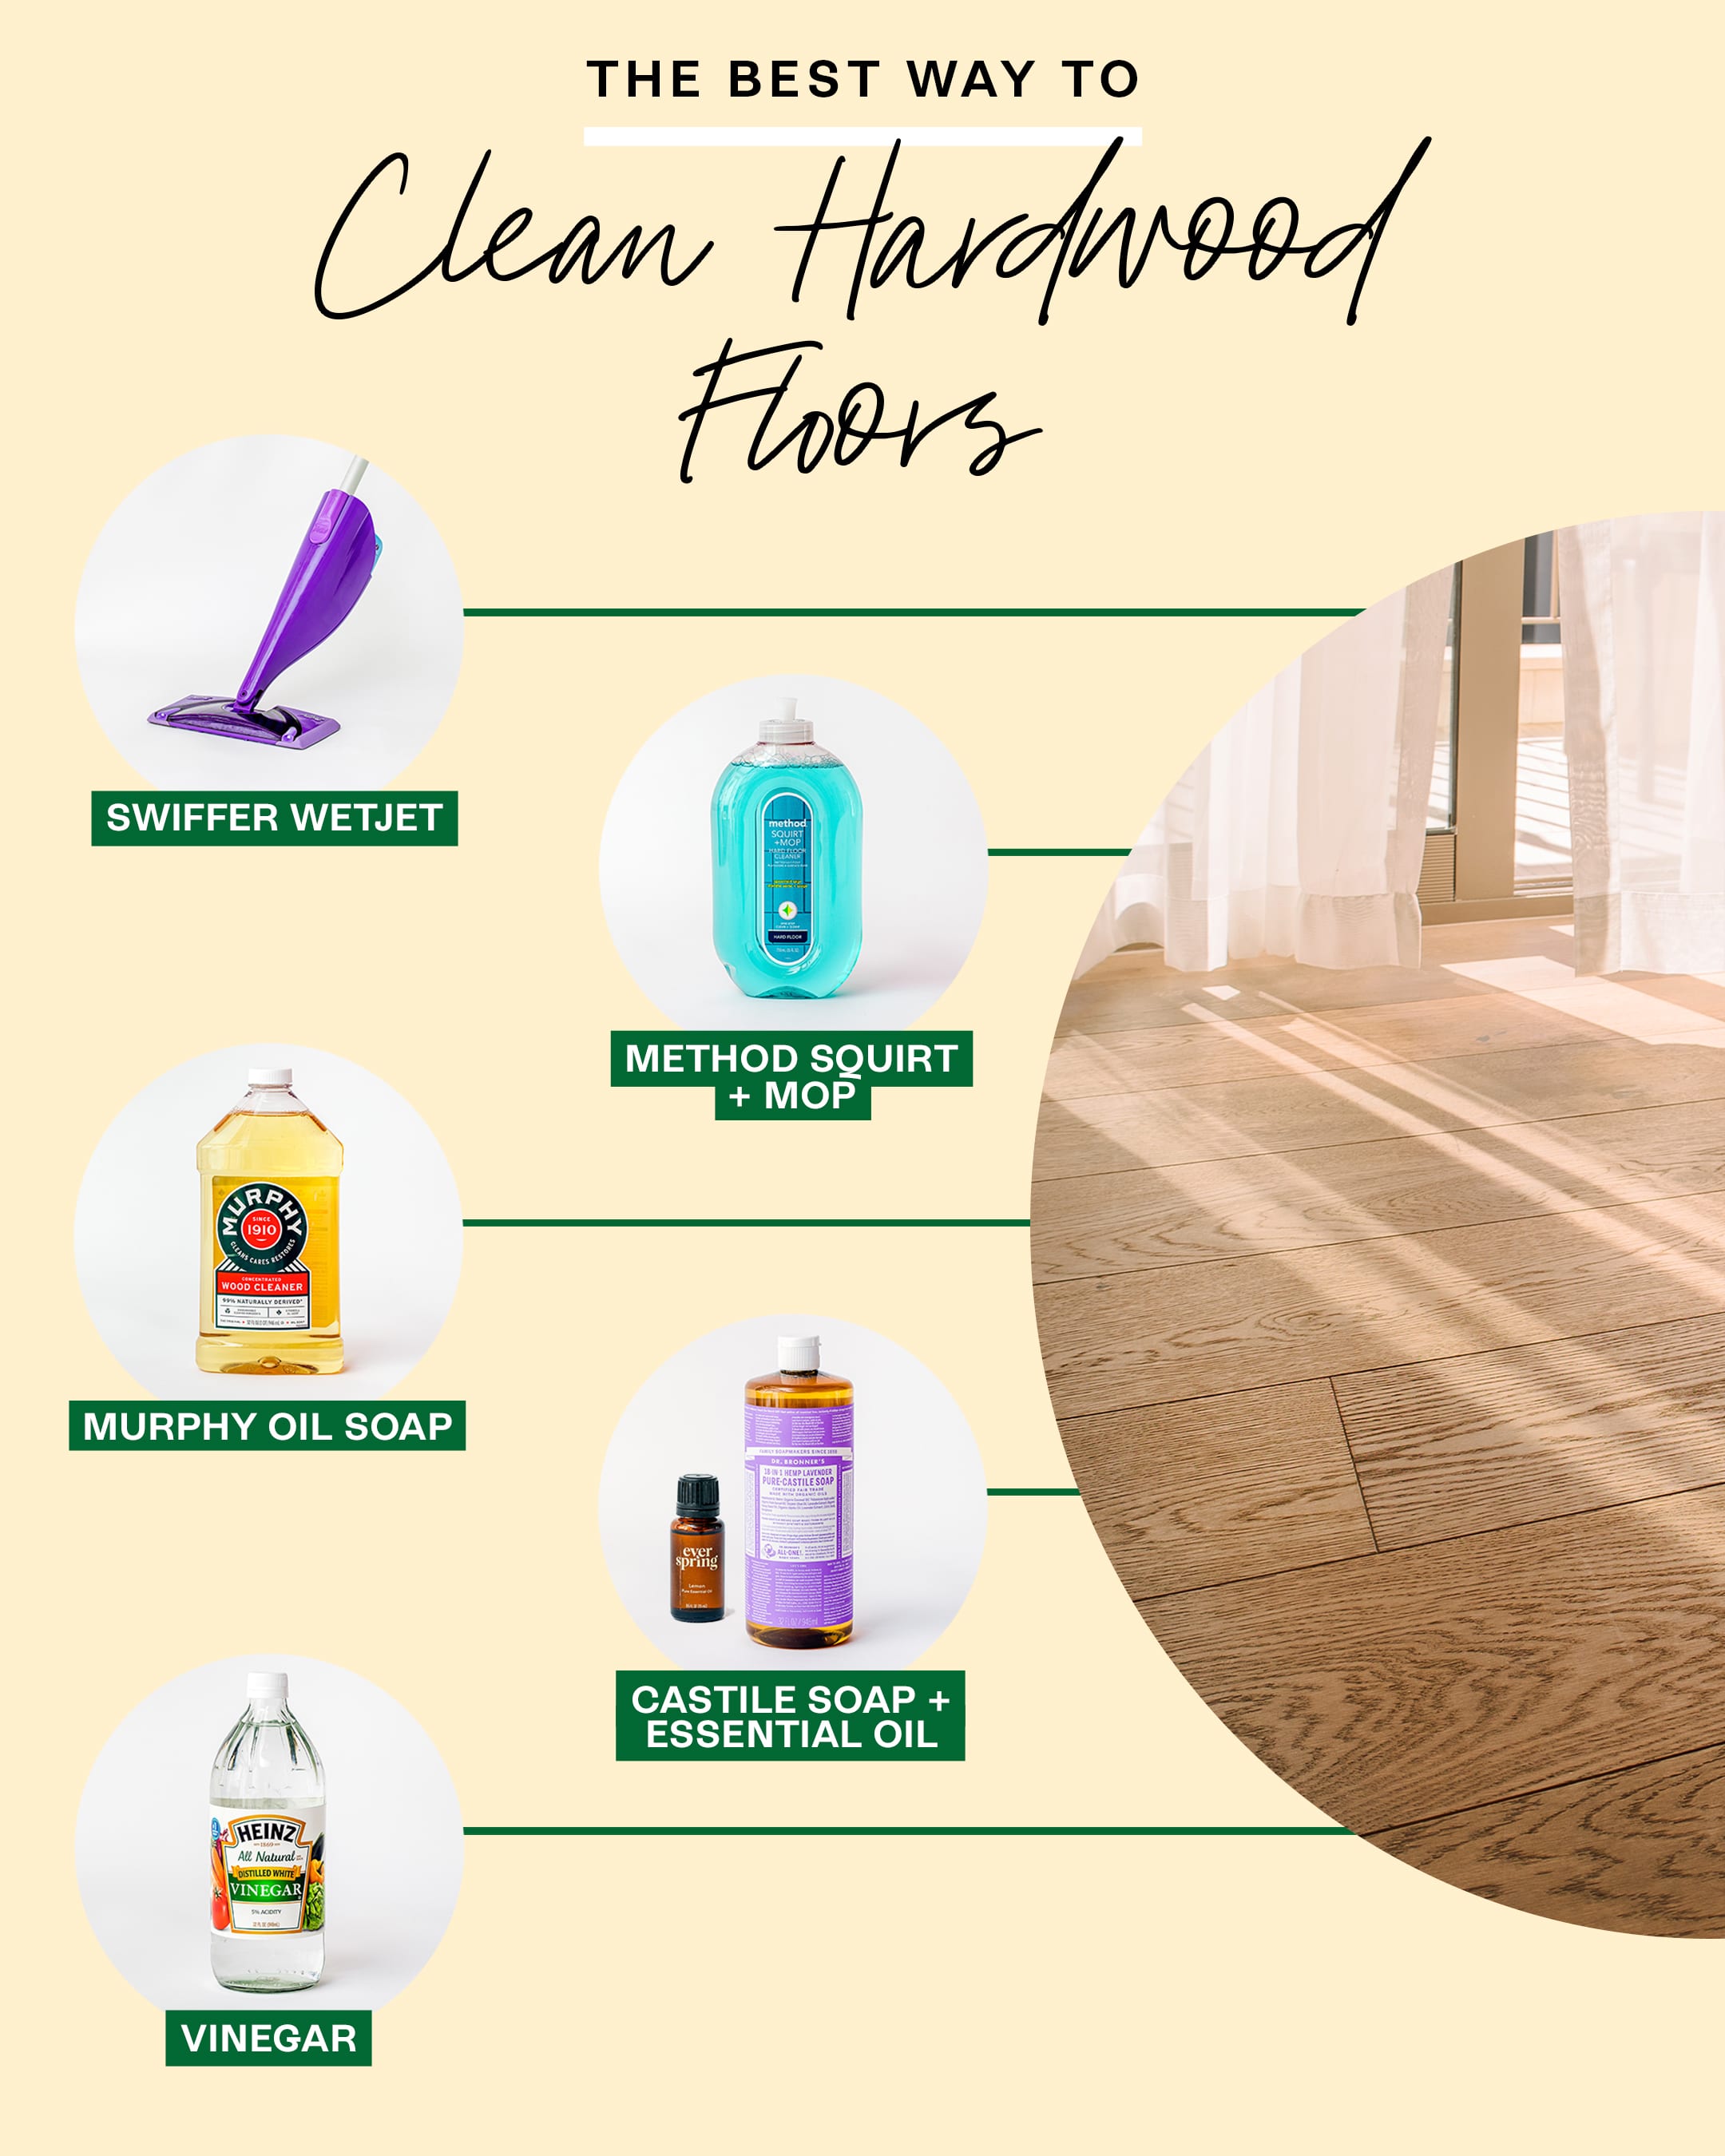 https://cdn.apartmenttherapy.info/image/upload/v1659710788/k/Photo/Lifestyle/2022-08-Cleaning-Showdown-Five-Methods-for-Cleaning-a-Hardwood-Floor/CleaningShowdown-hardwoodfloors-update.jpg